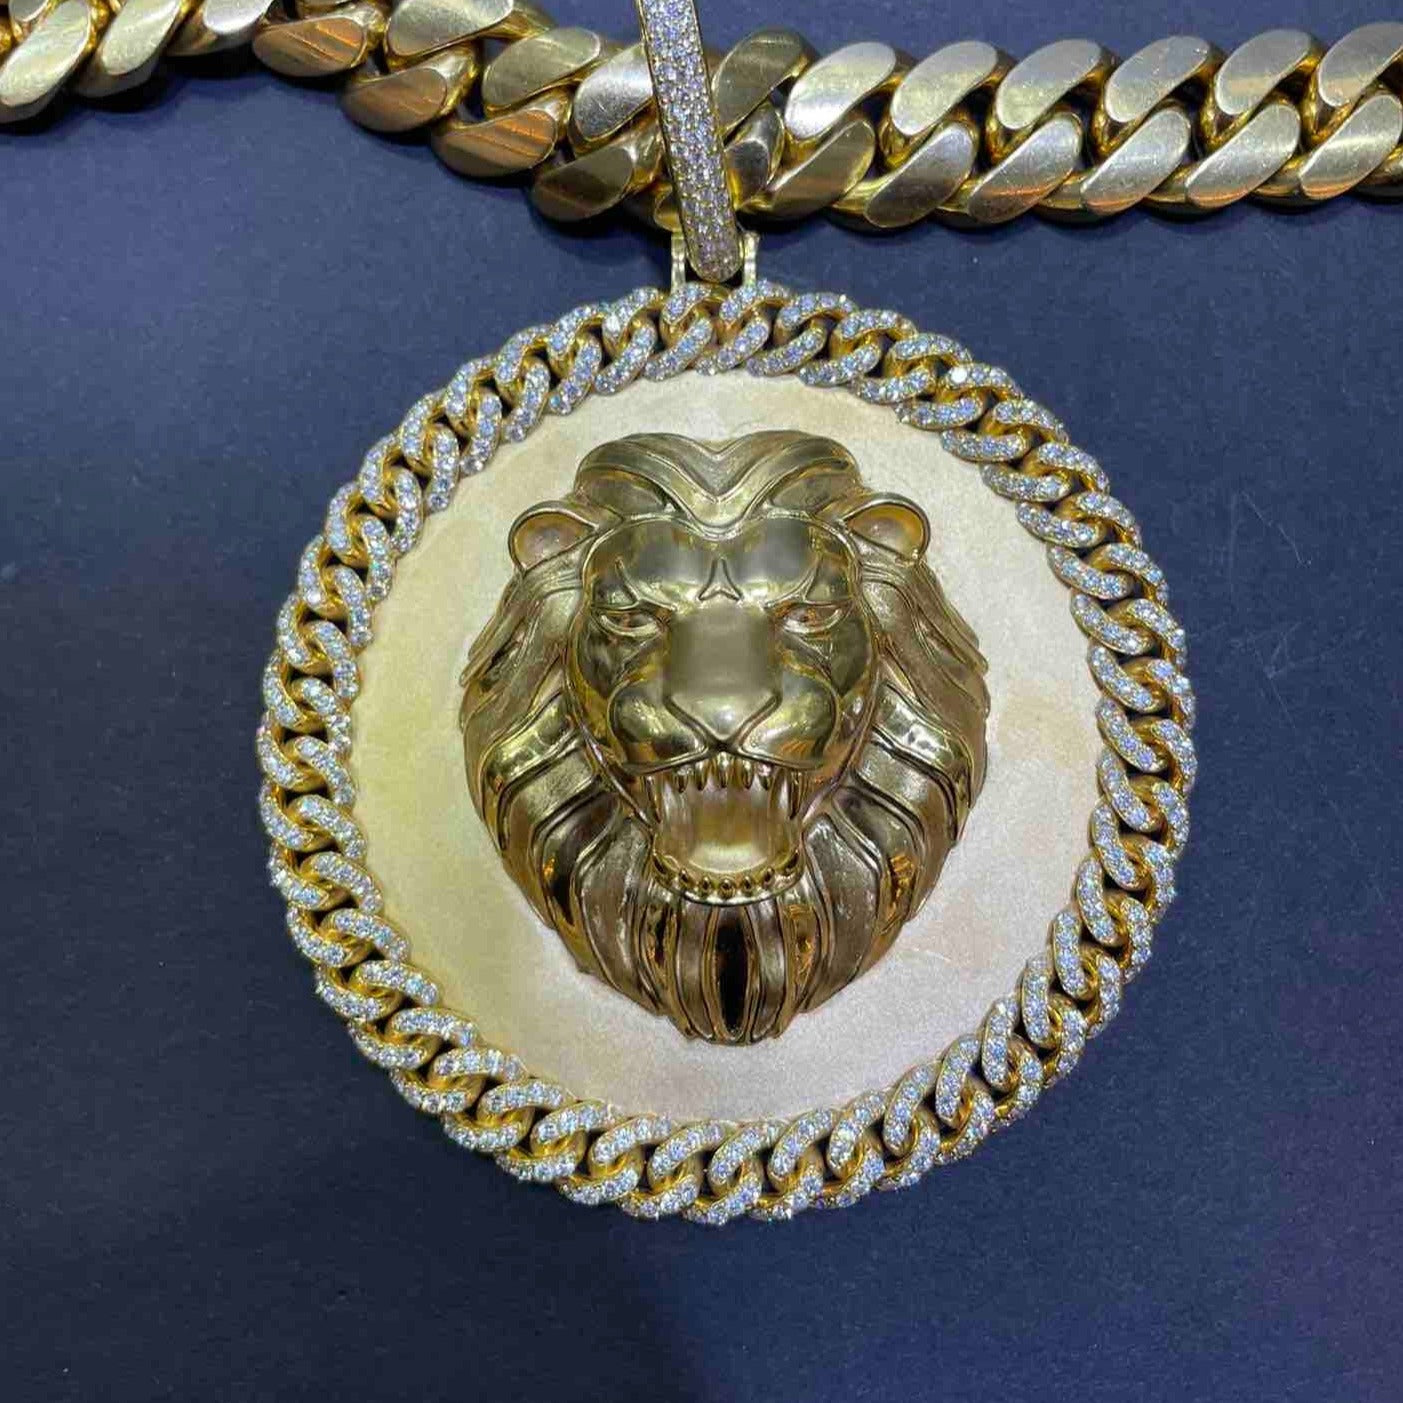 Brand New Custom Made 14k Solid Gold "Iced Out" Tiger Charm Pendant with vvs1 natural diamonds